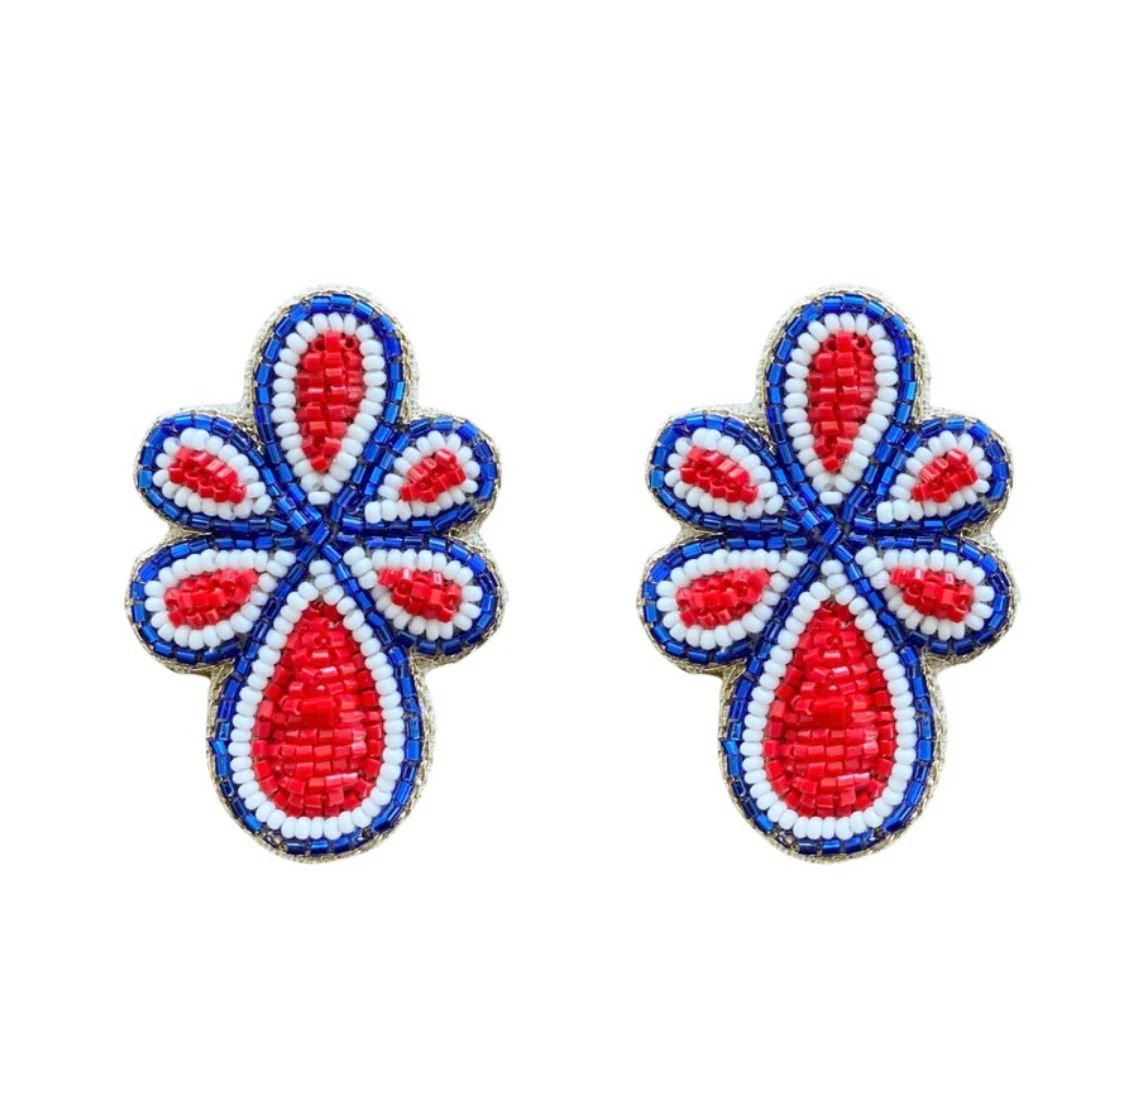 Mercer Earrings in Red, White and Blue | Beth Ladd Collections